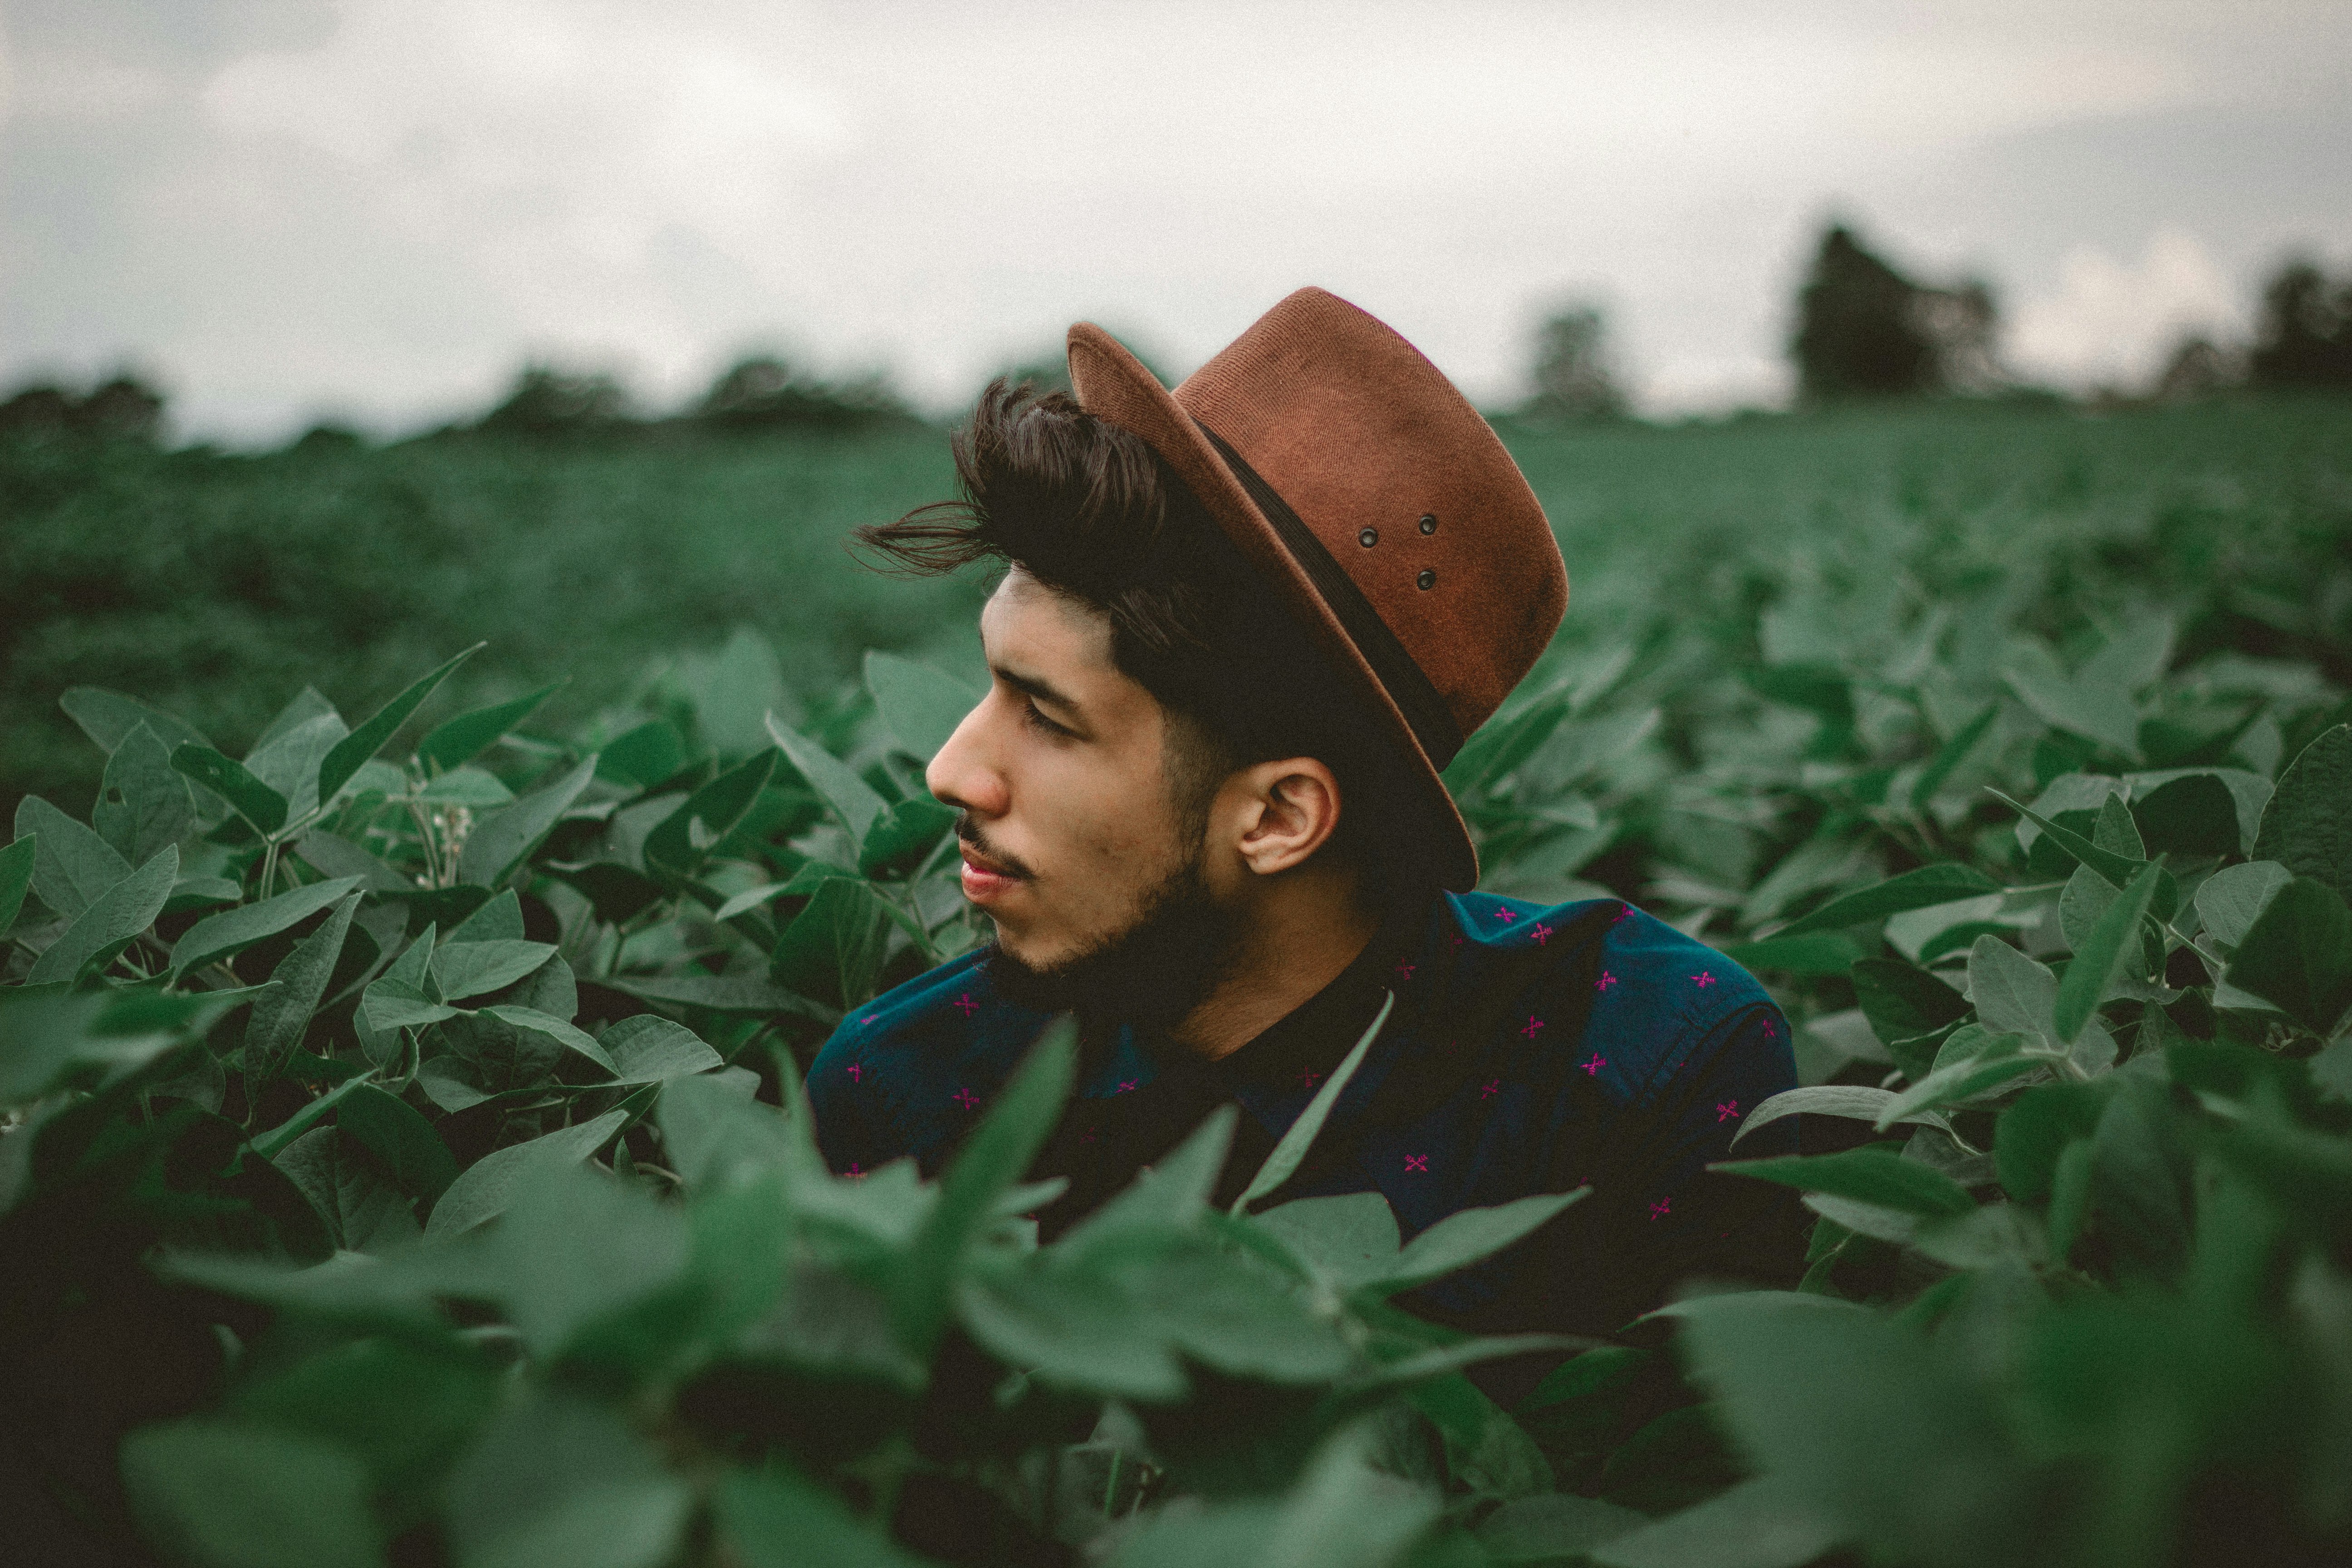 man surrounded by green leafed plant field in shallow focus photography